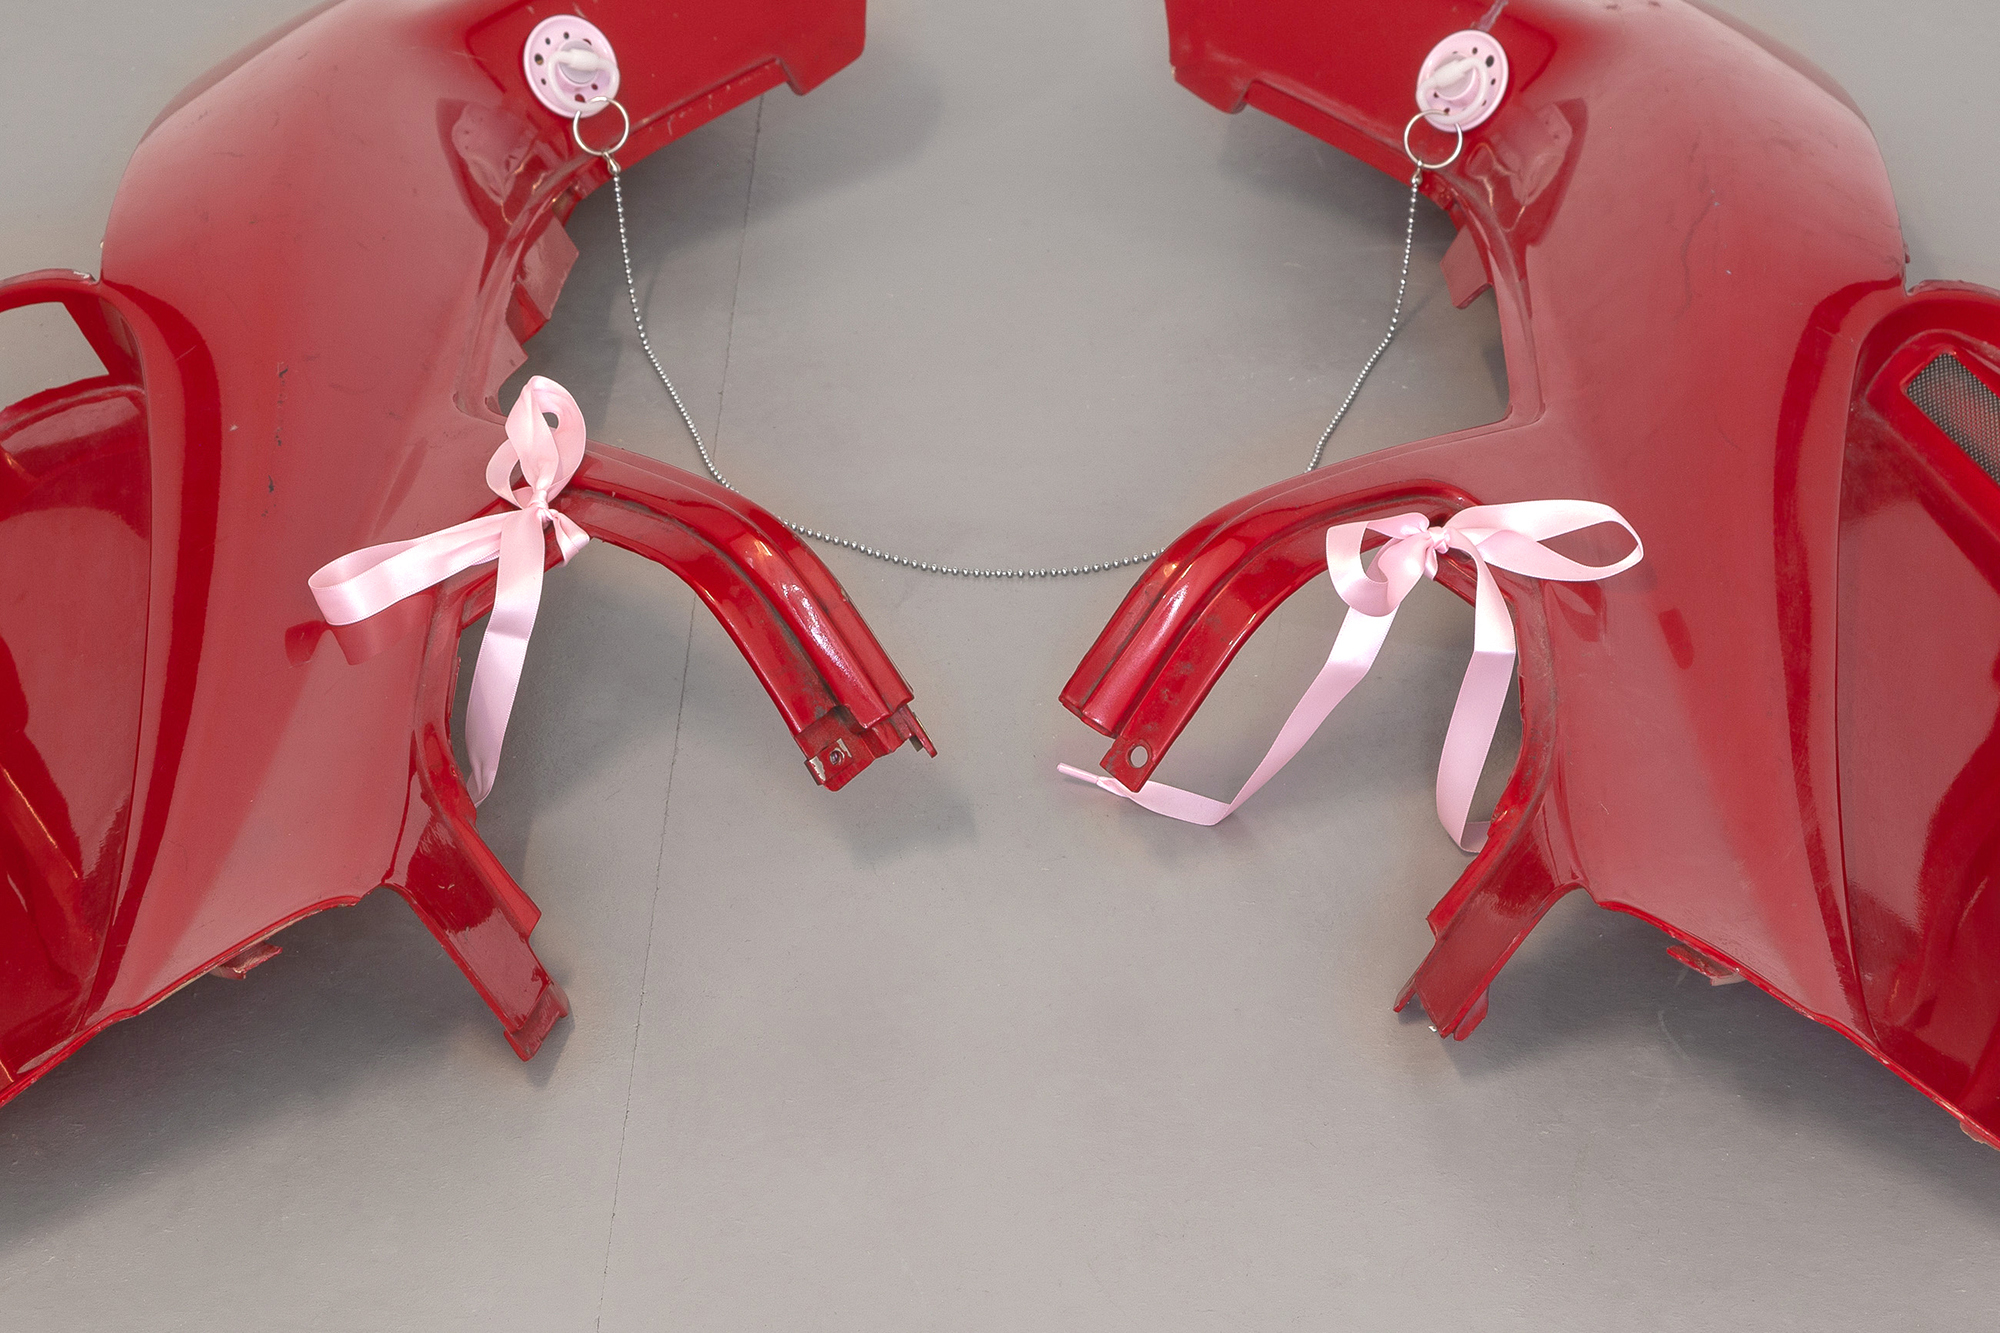 13. Paula Linke, Red Hot Lovers, scooter fairing, pacifier, ball chain, shoelaces, 2022 (Detail)